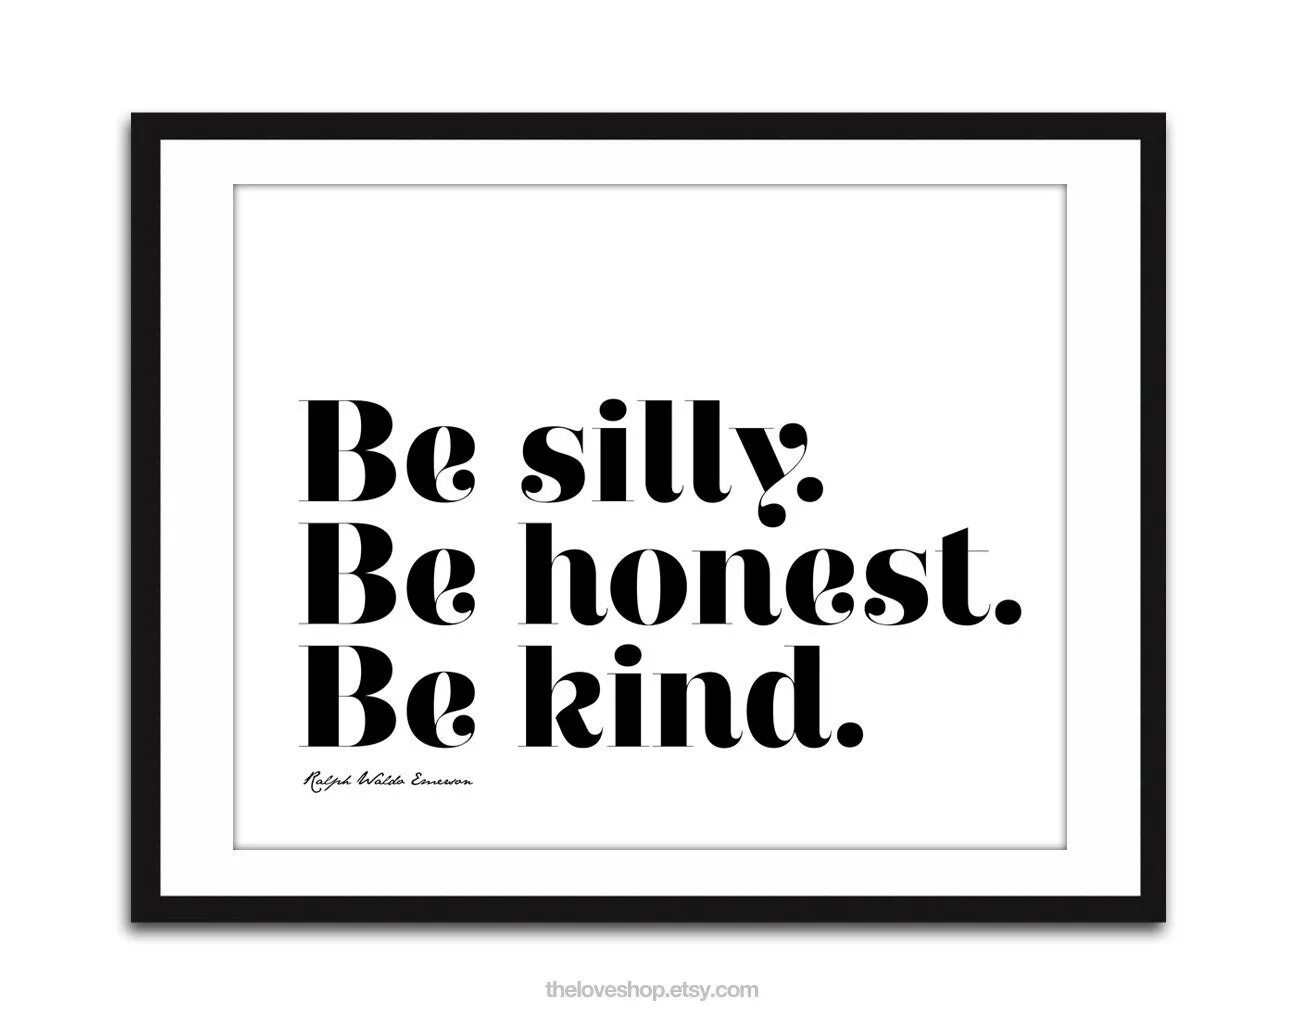 He was honest. Be honest. Be kind. Kind quotes. Be silly be honest be kind перевод.